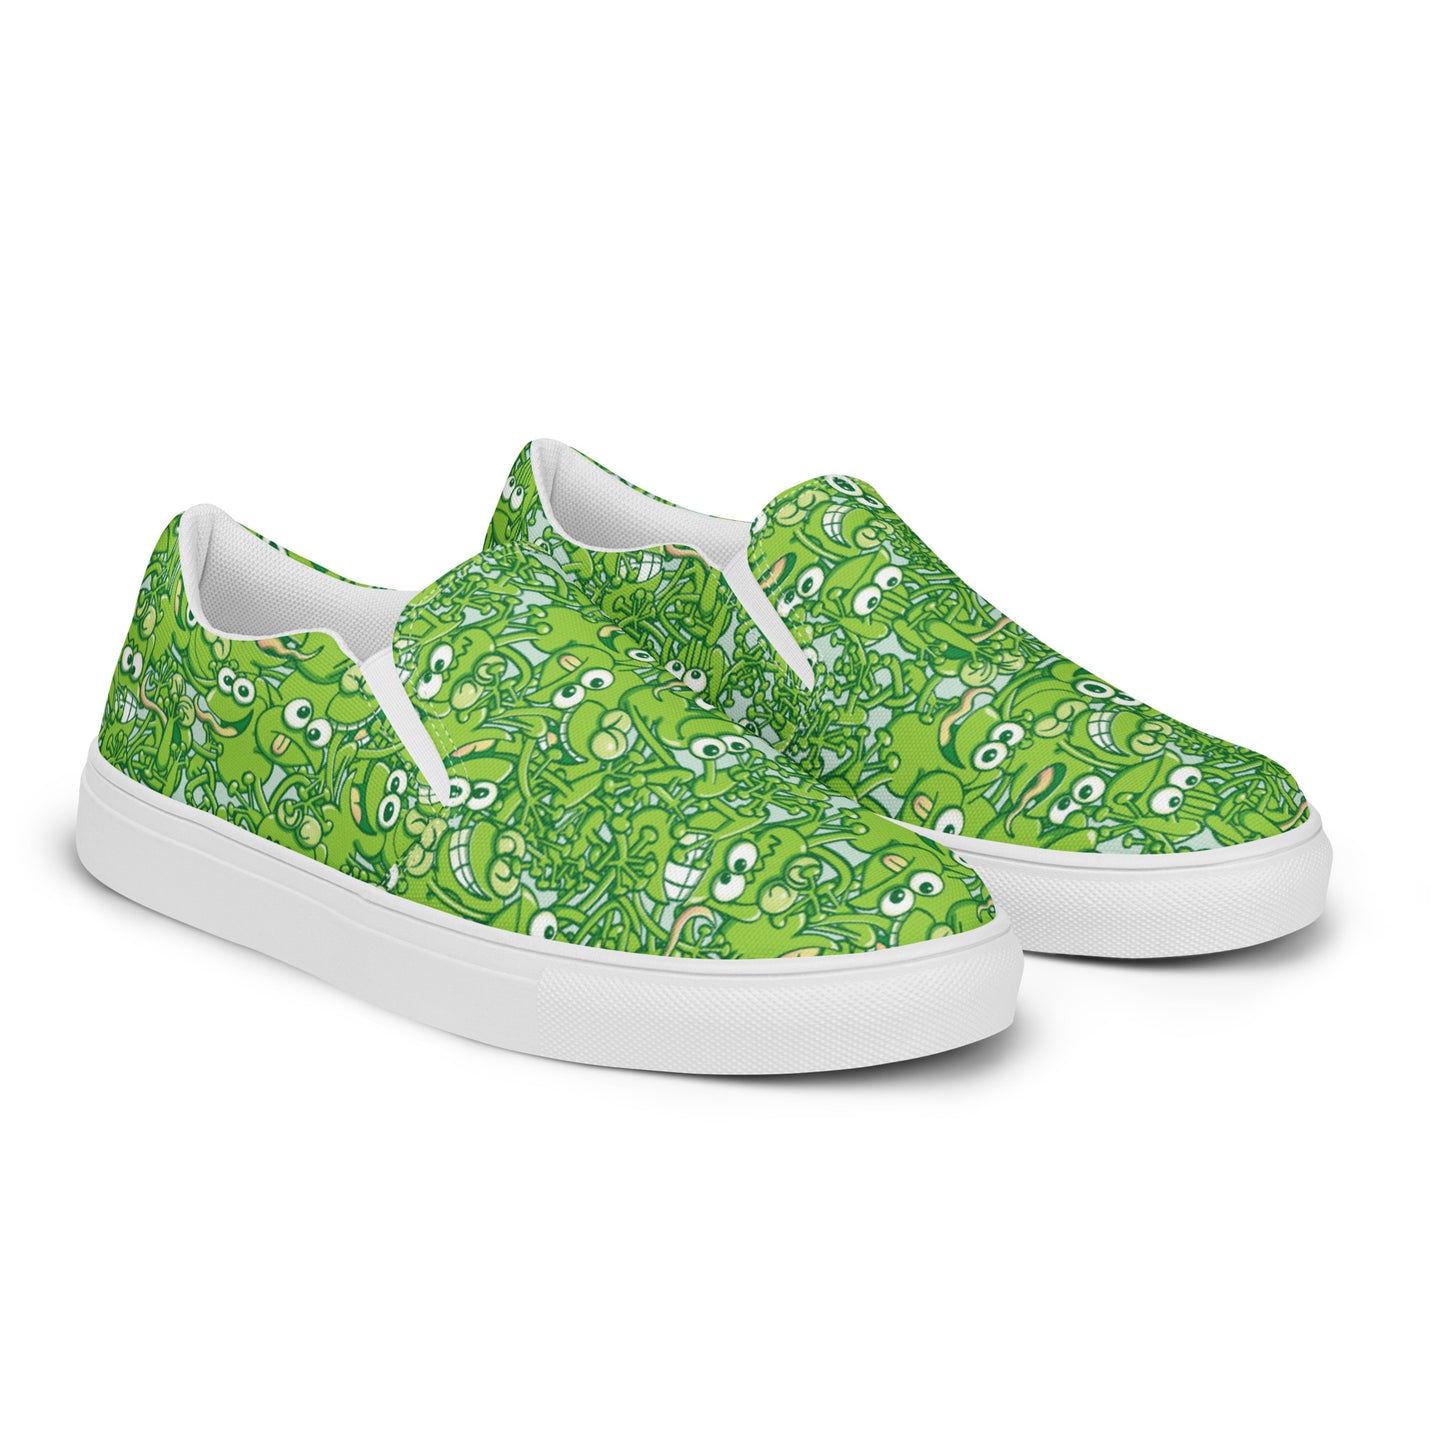 A tangled army of happy green frogs appears when the rain stops Women’s slip-on canvas shoes. Overview